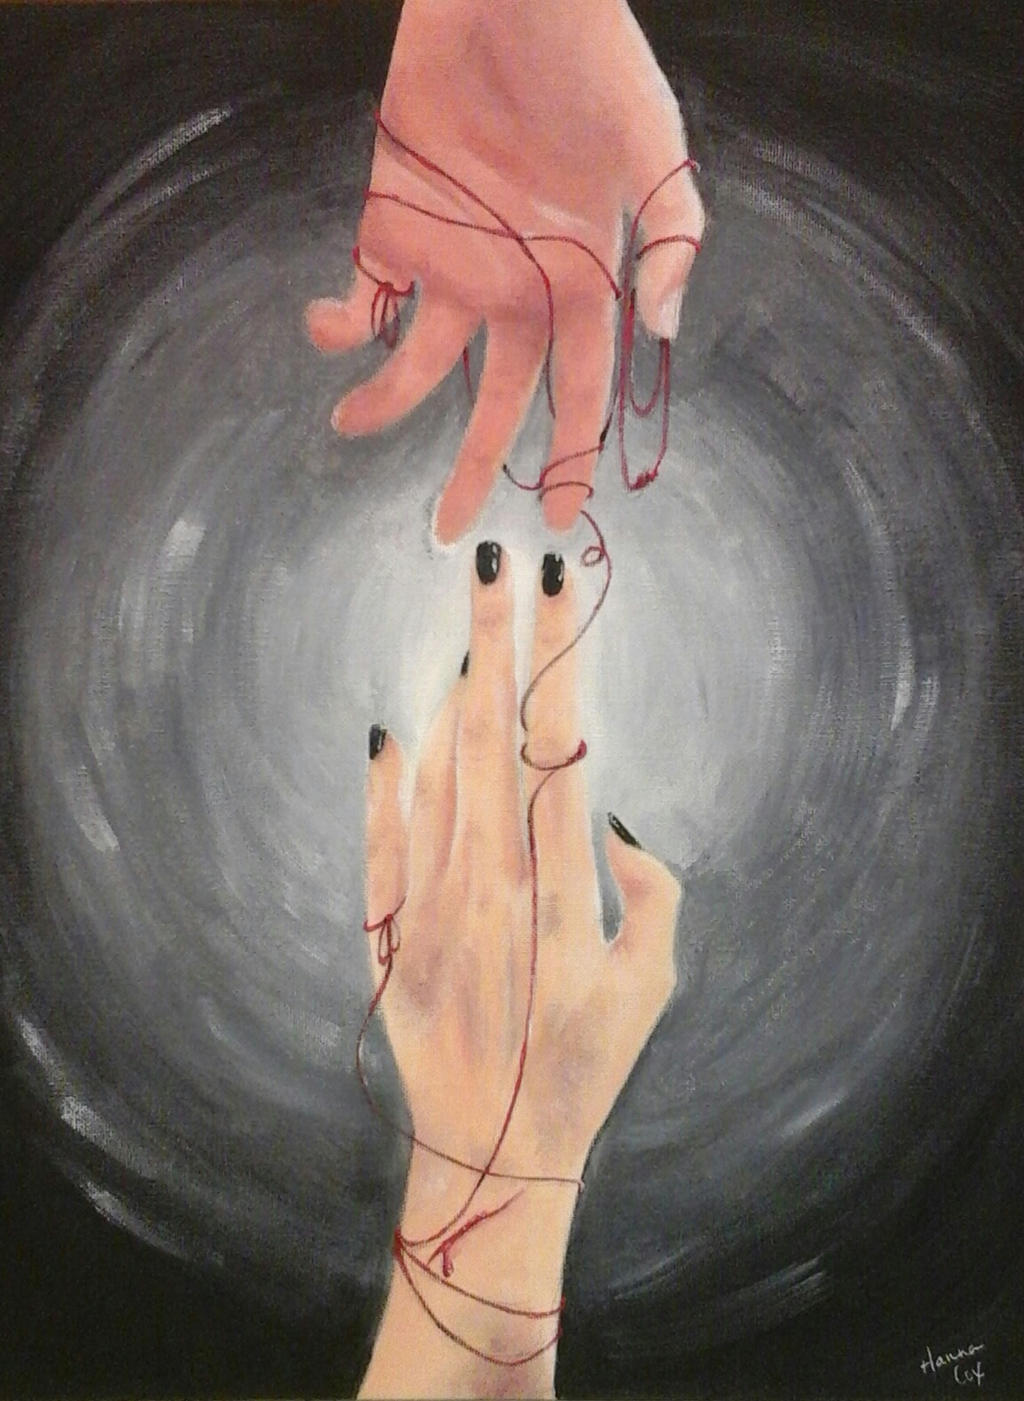 The red string